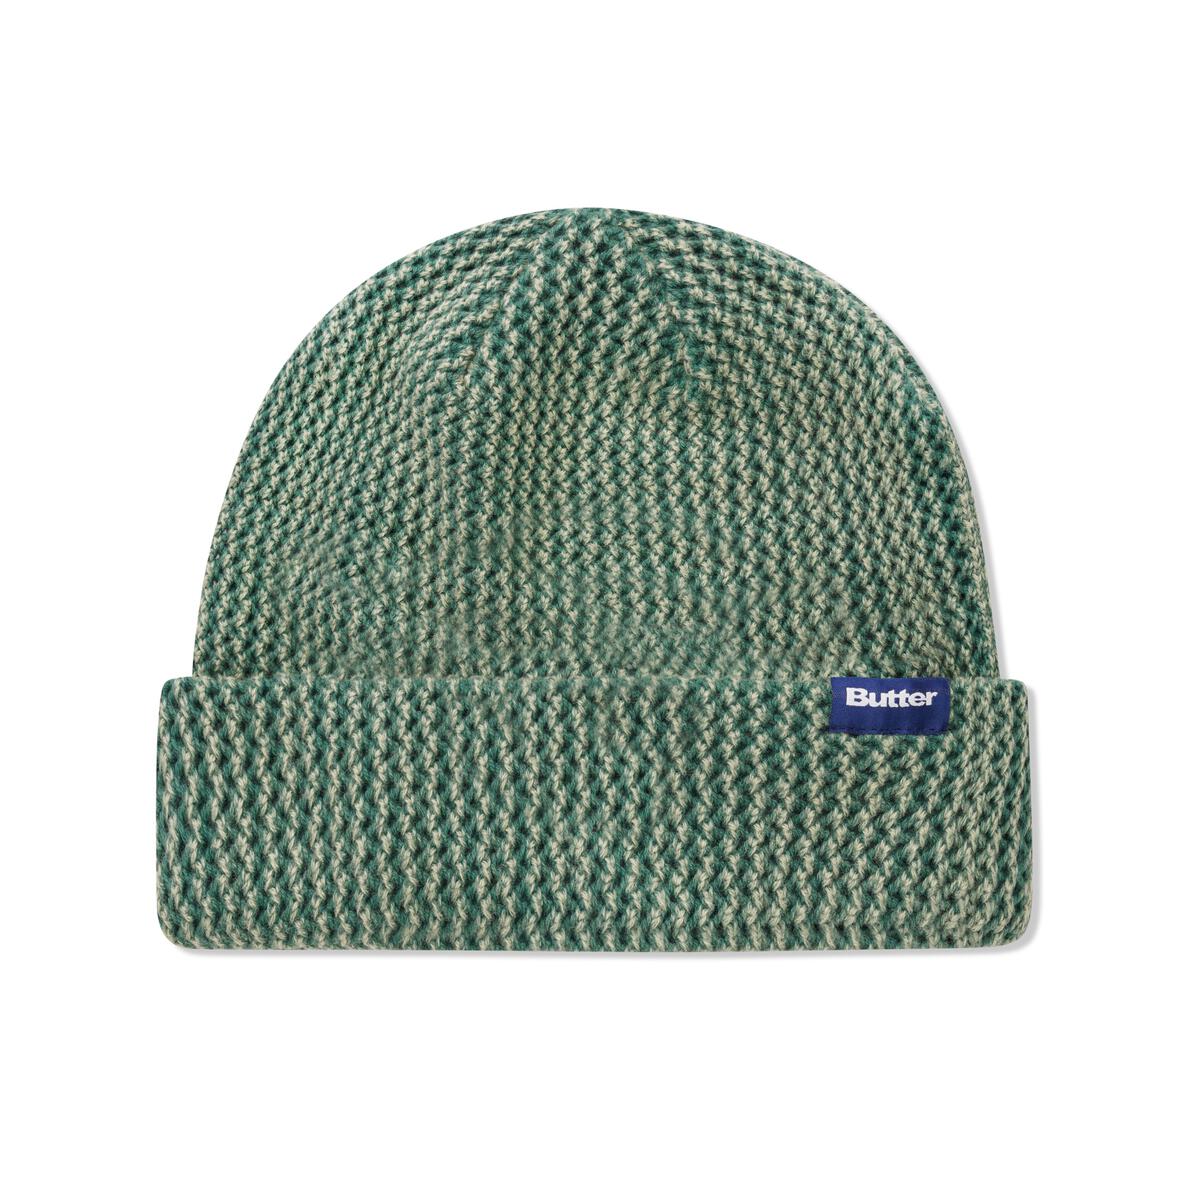 BUTTERGOODS DYED BEANIE WASHED ARMY